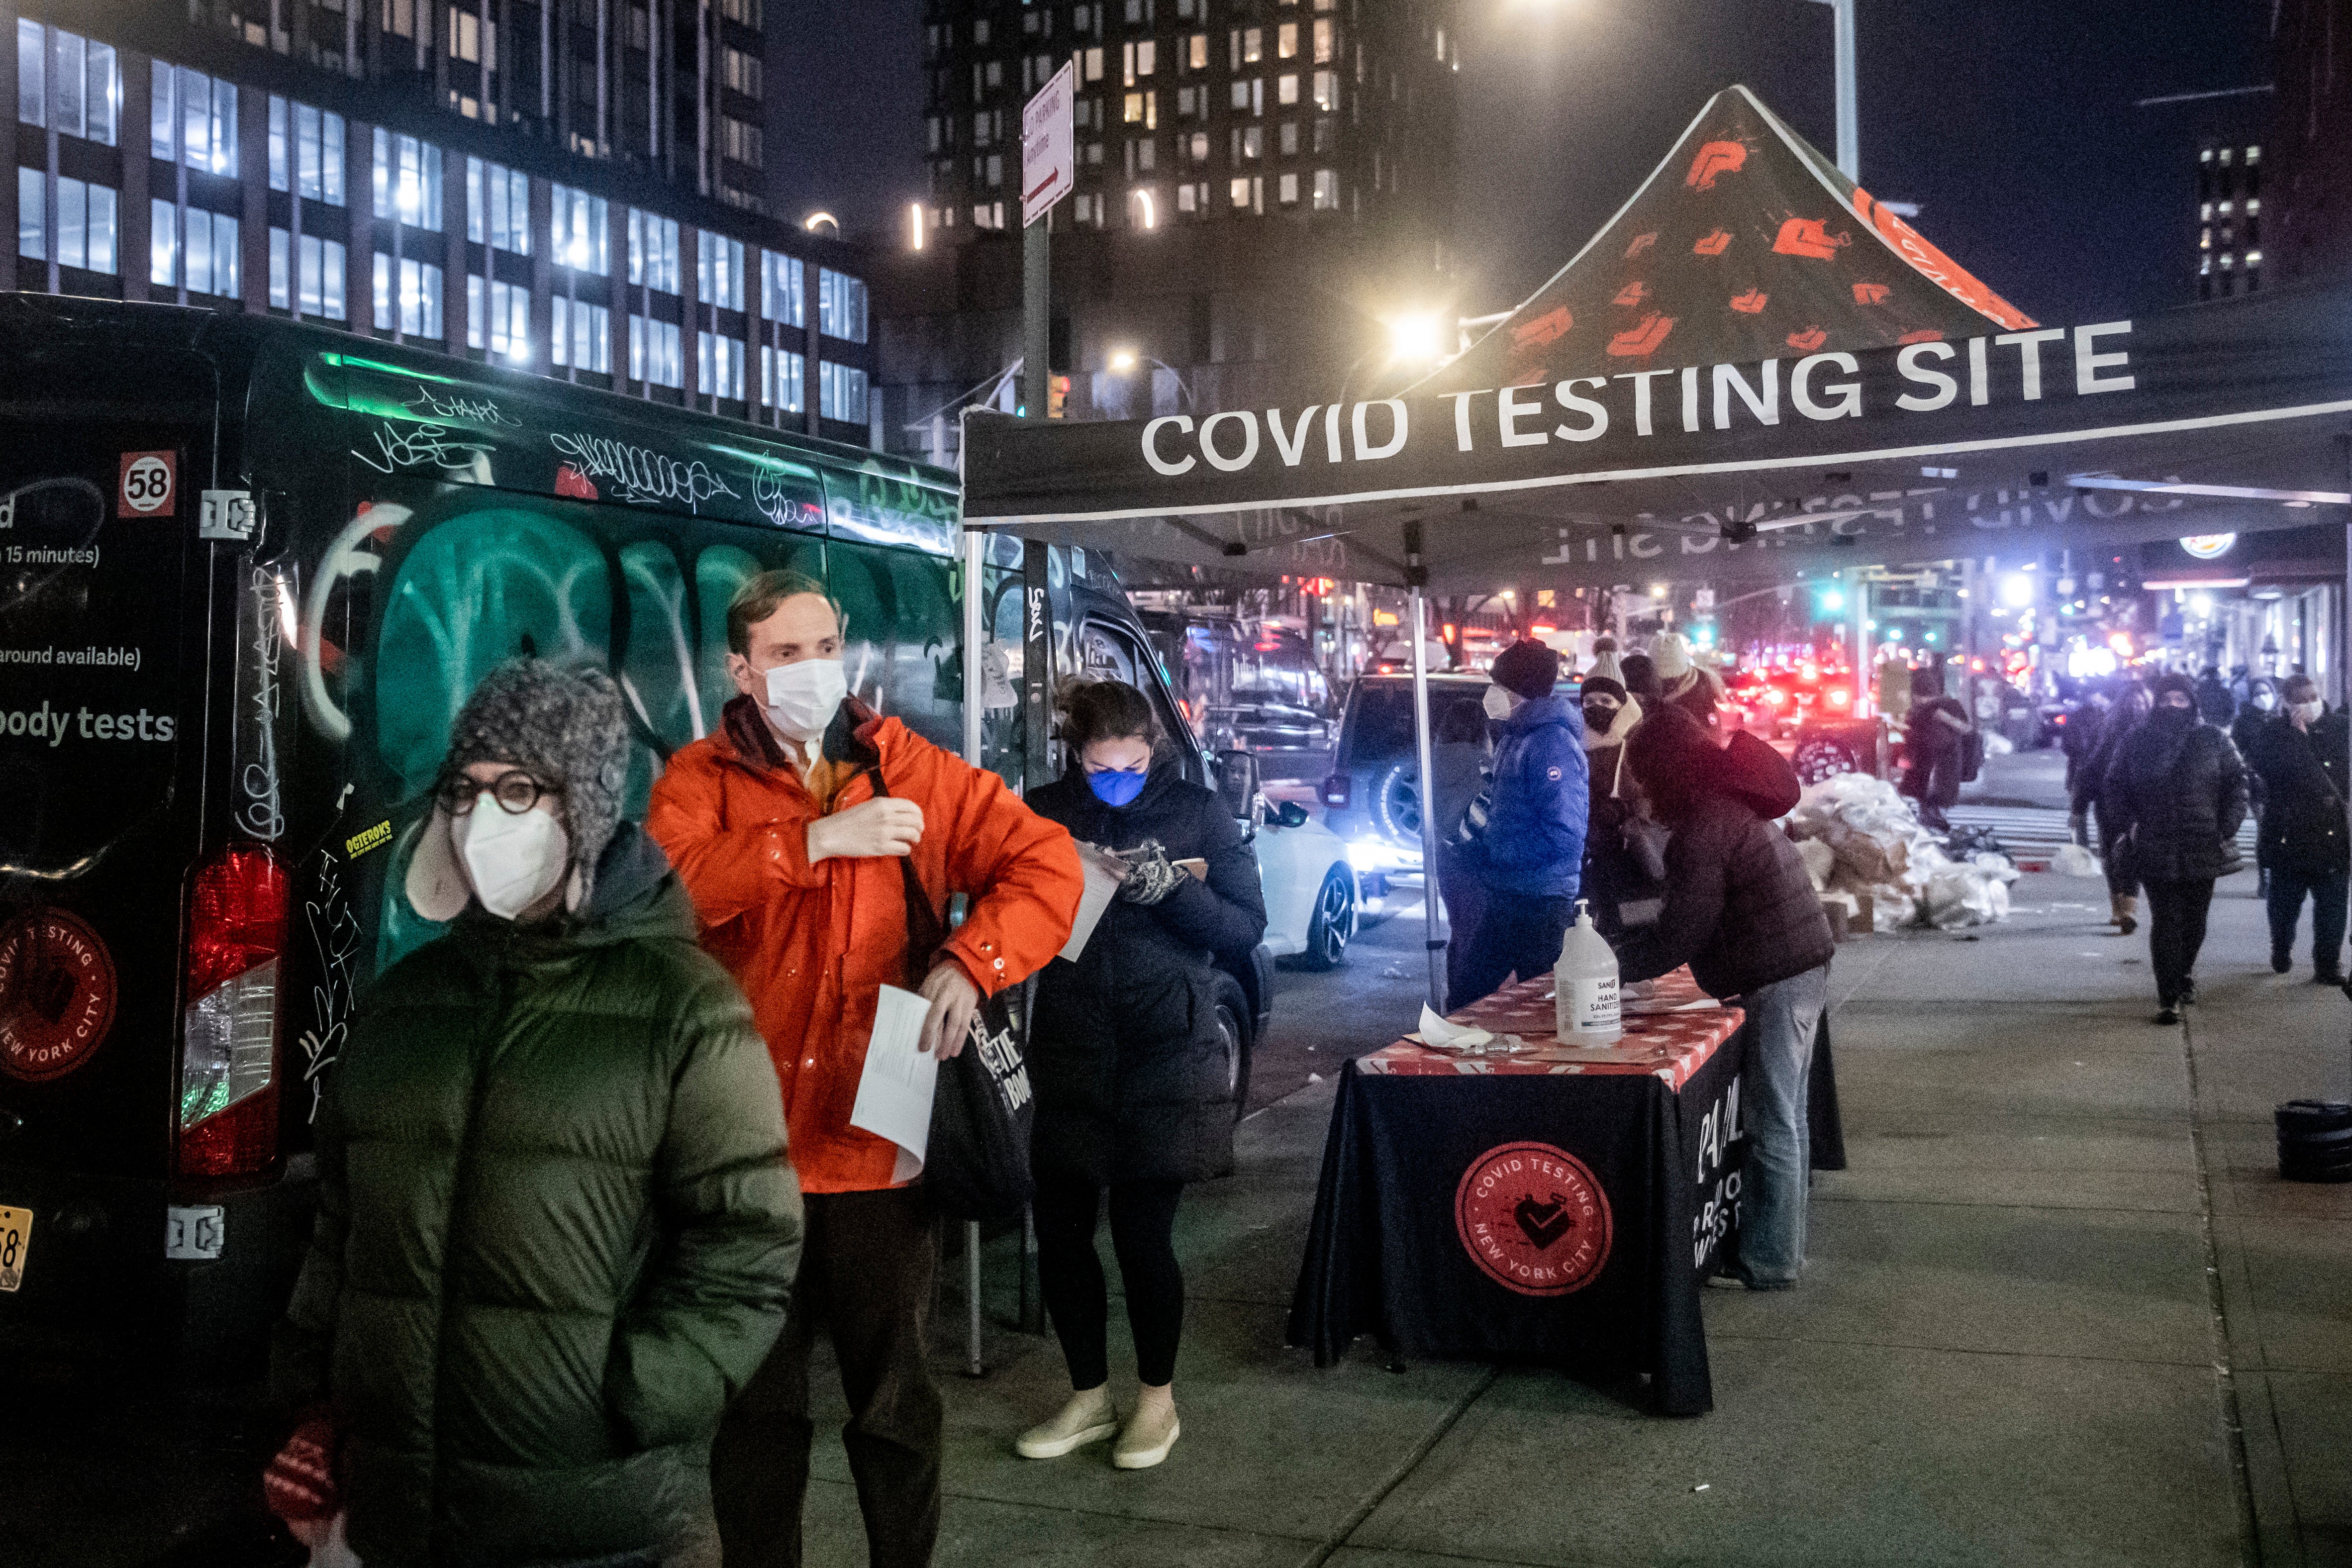 People wait on line to get tested for Covid-19 on the Lower East Side of Manhattan